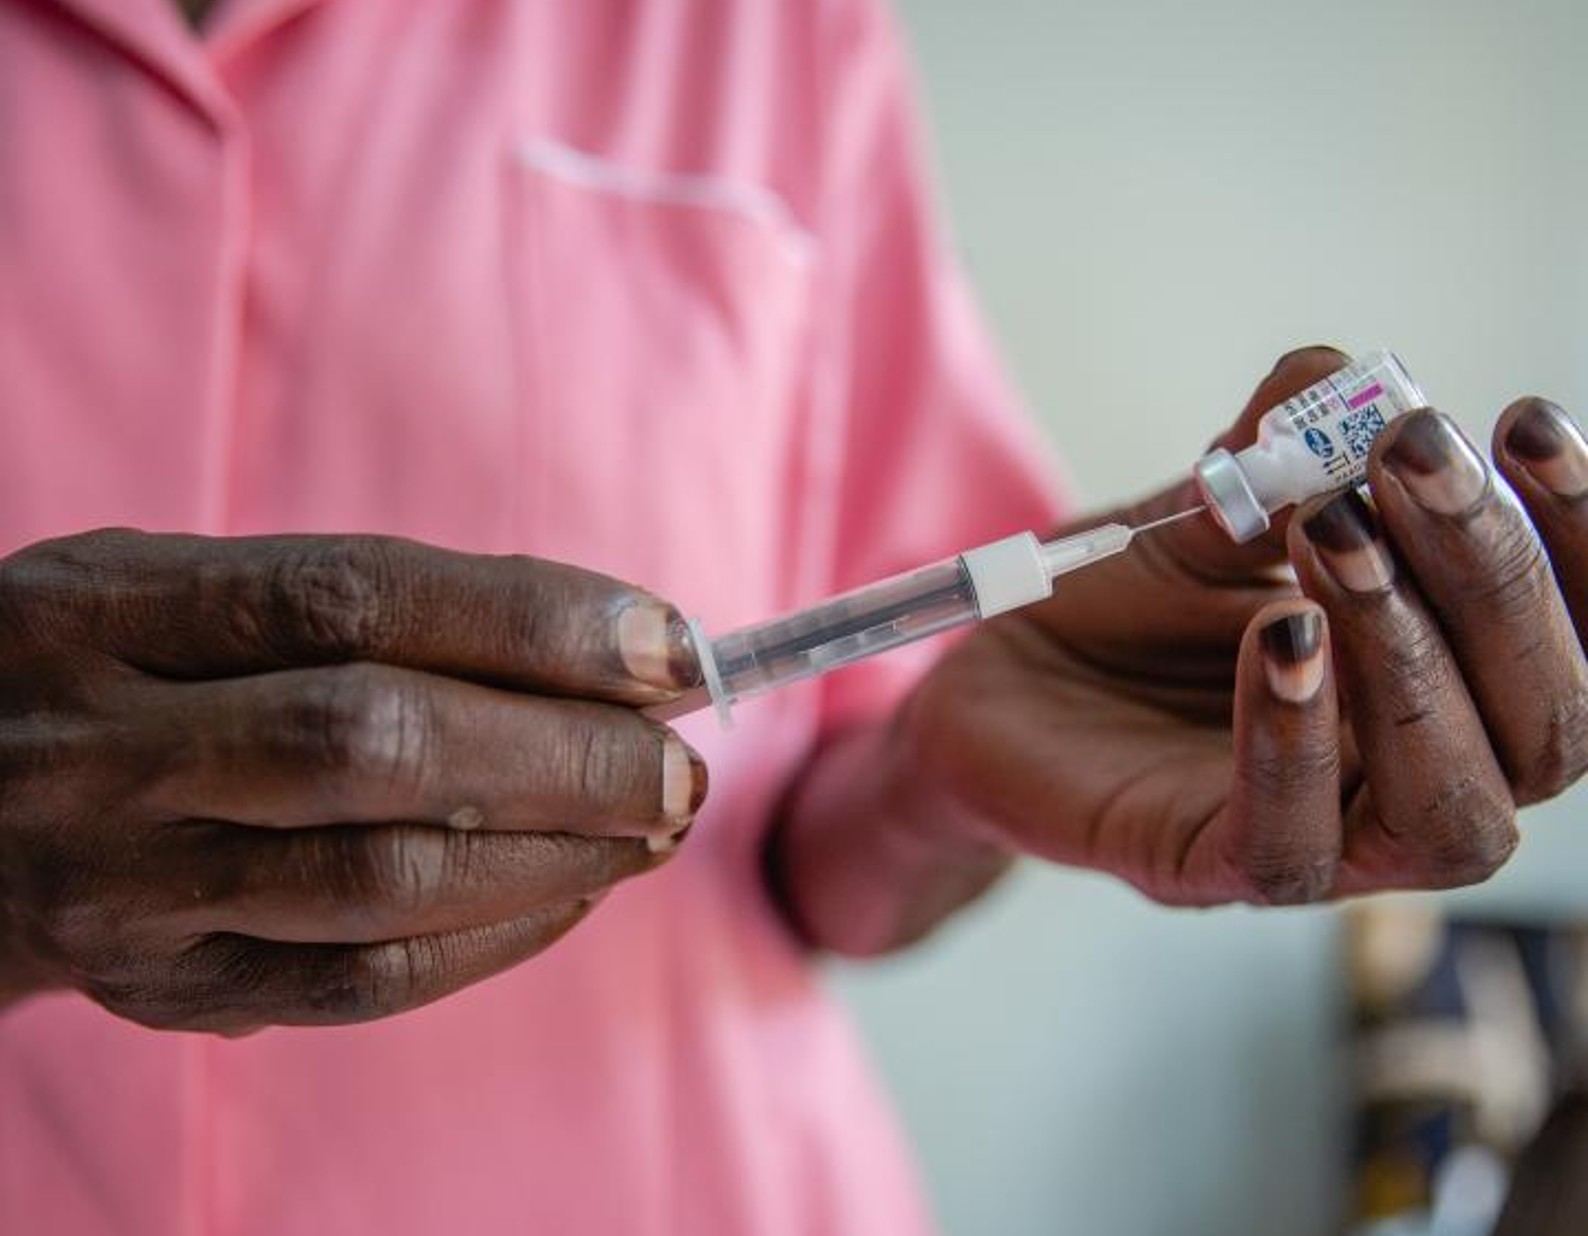 Nurse Margaret gives an injection to a client at Kawala Health Center IV in Uganda - Action Aid report